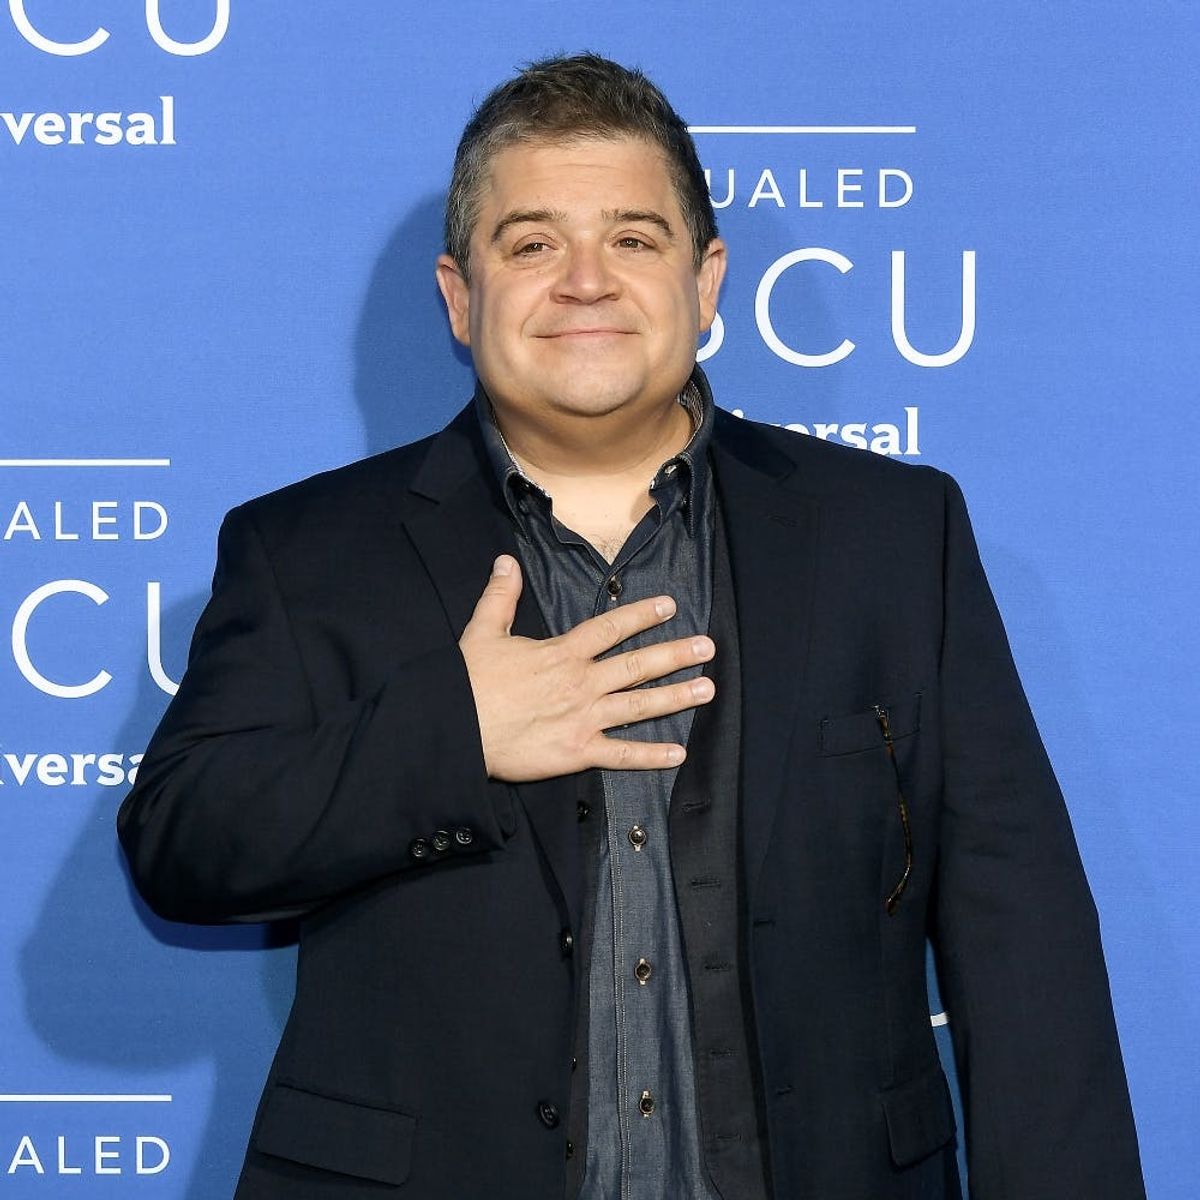 Patton Oswalt Is Engaged to Meredith Salenger